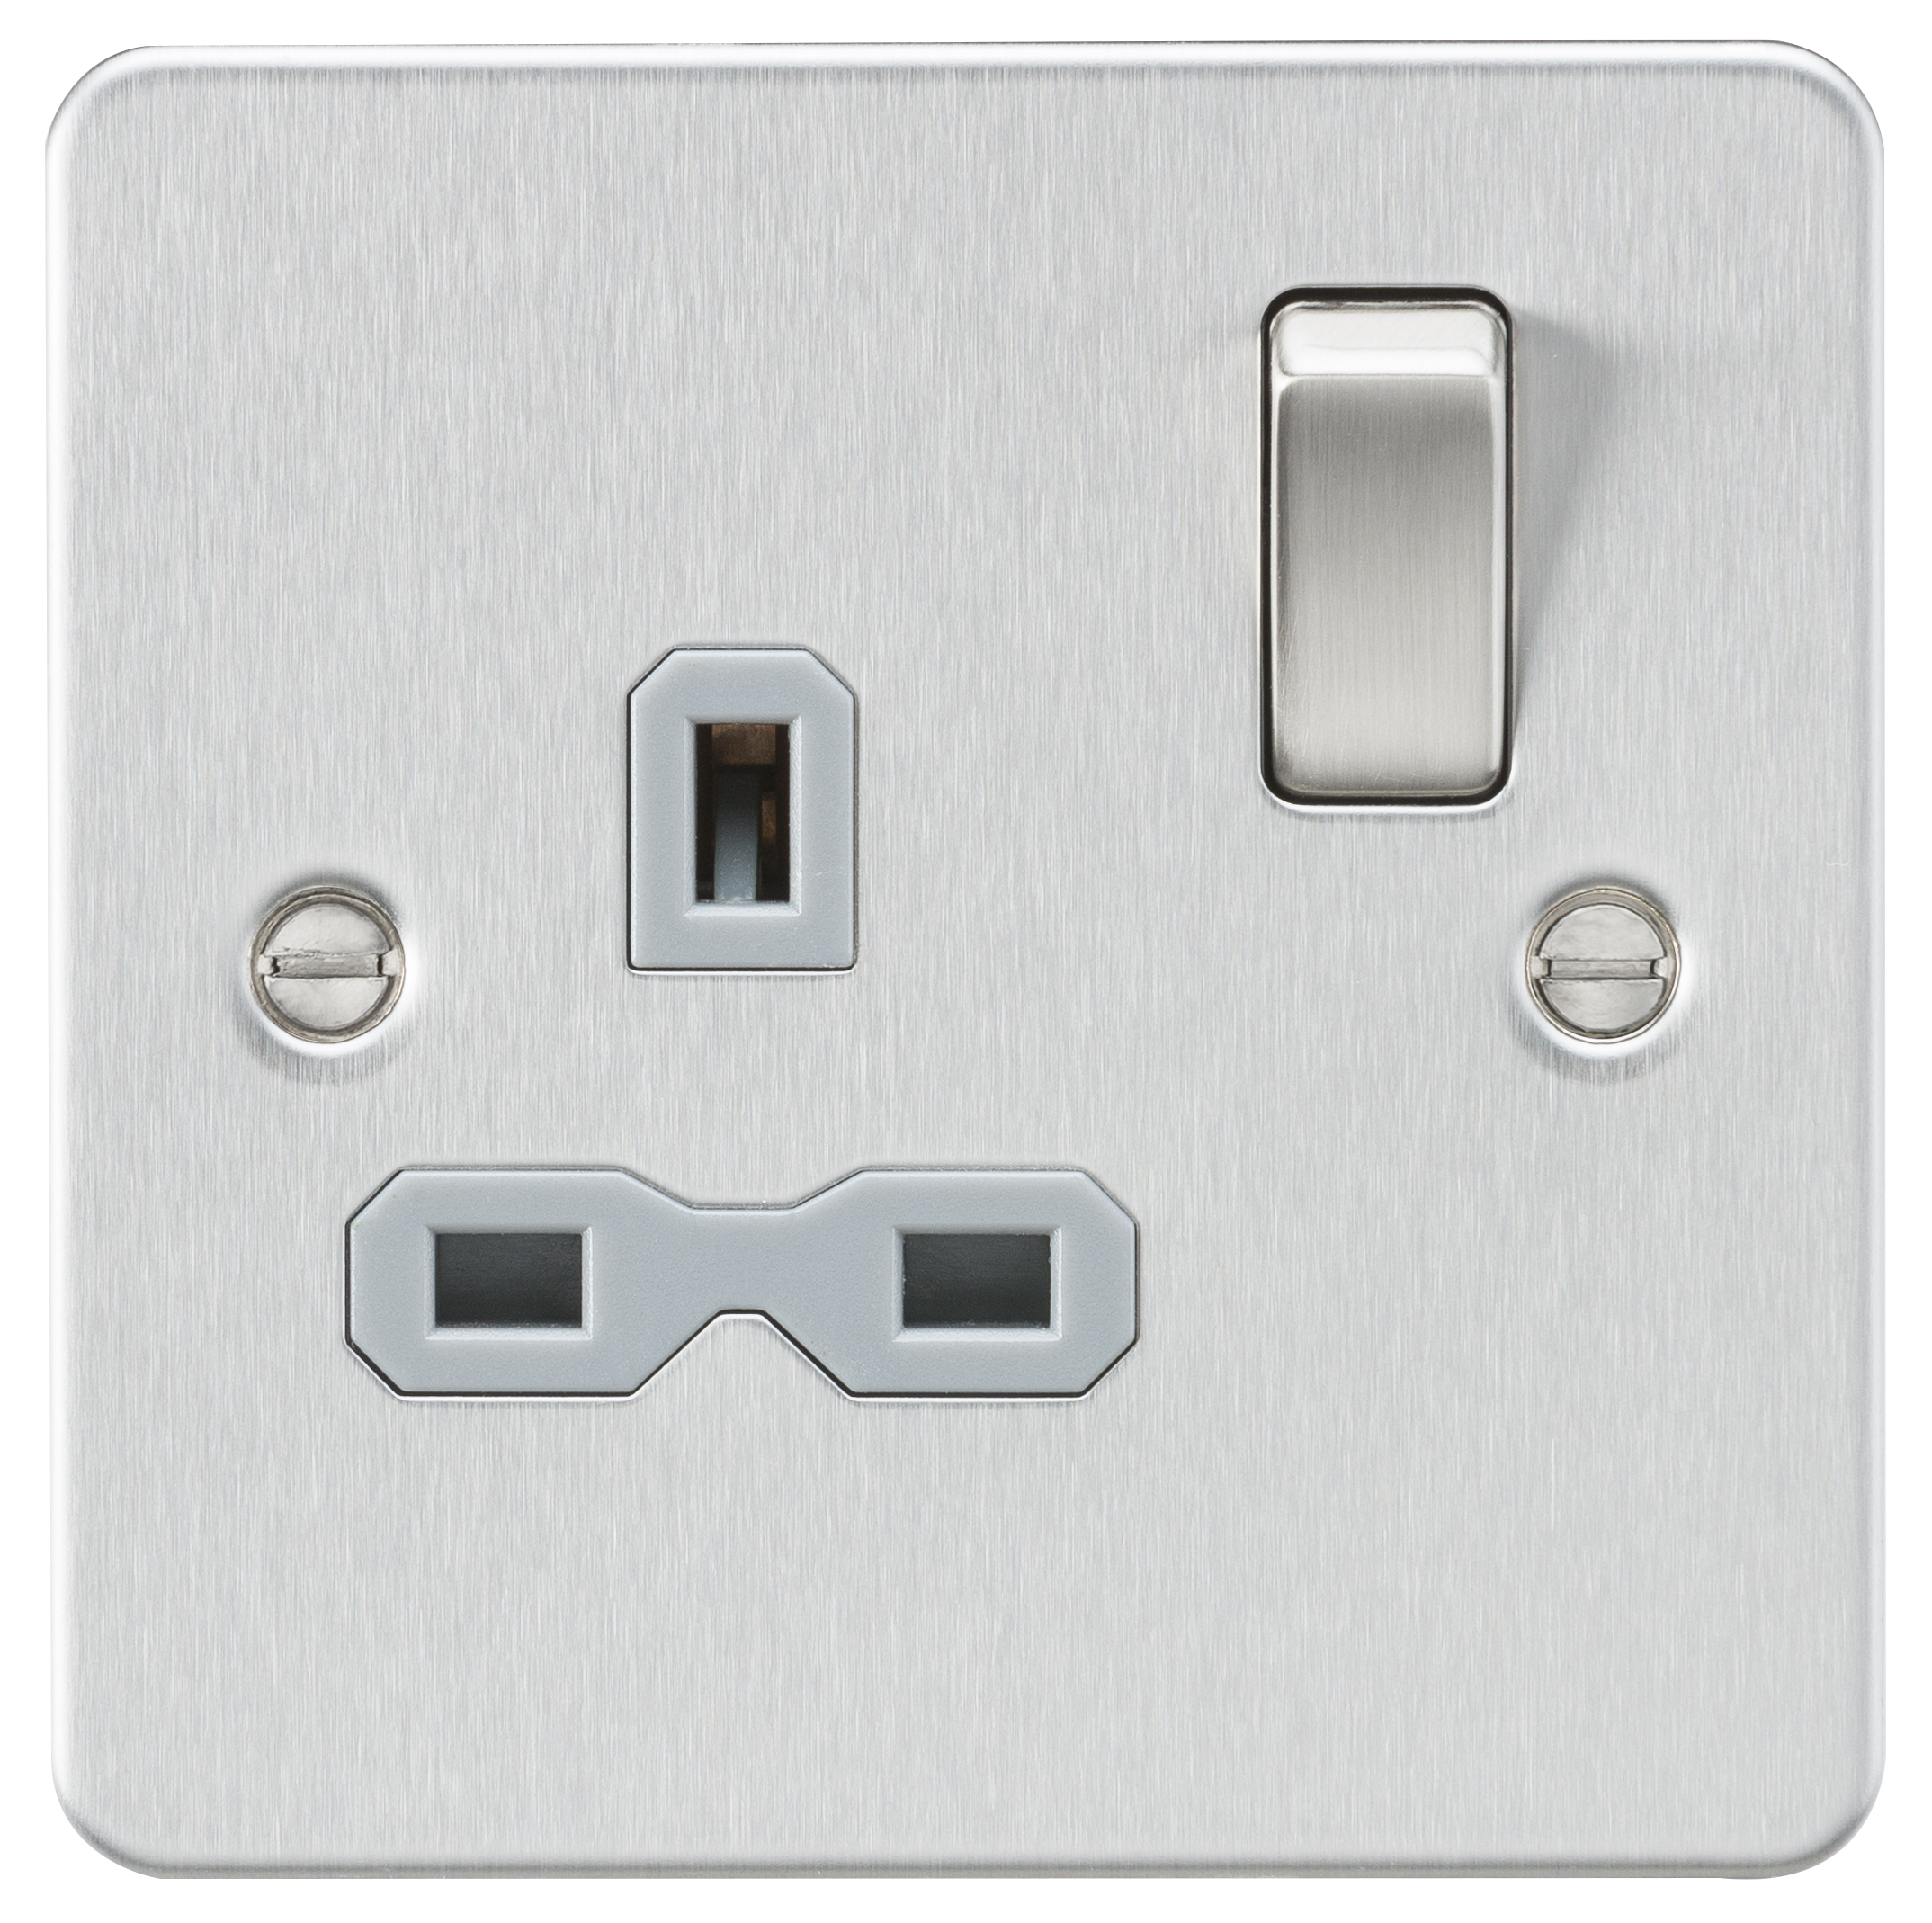 Flat Plate 13A 1G DP Switched Socket - Brushed Chrome With Grey Insert - FPR7000BCG 